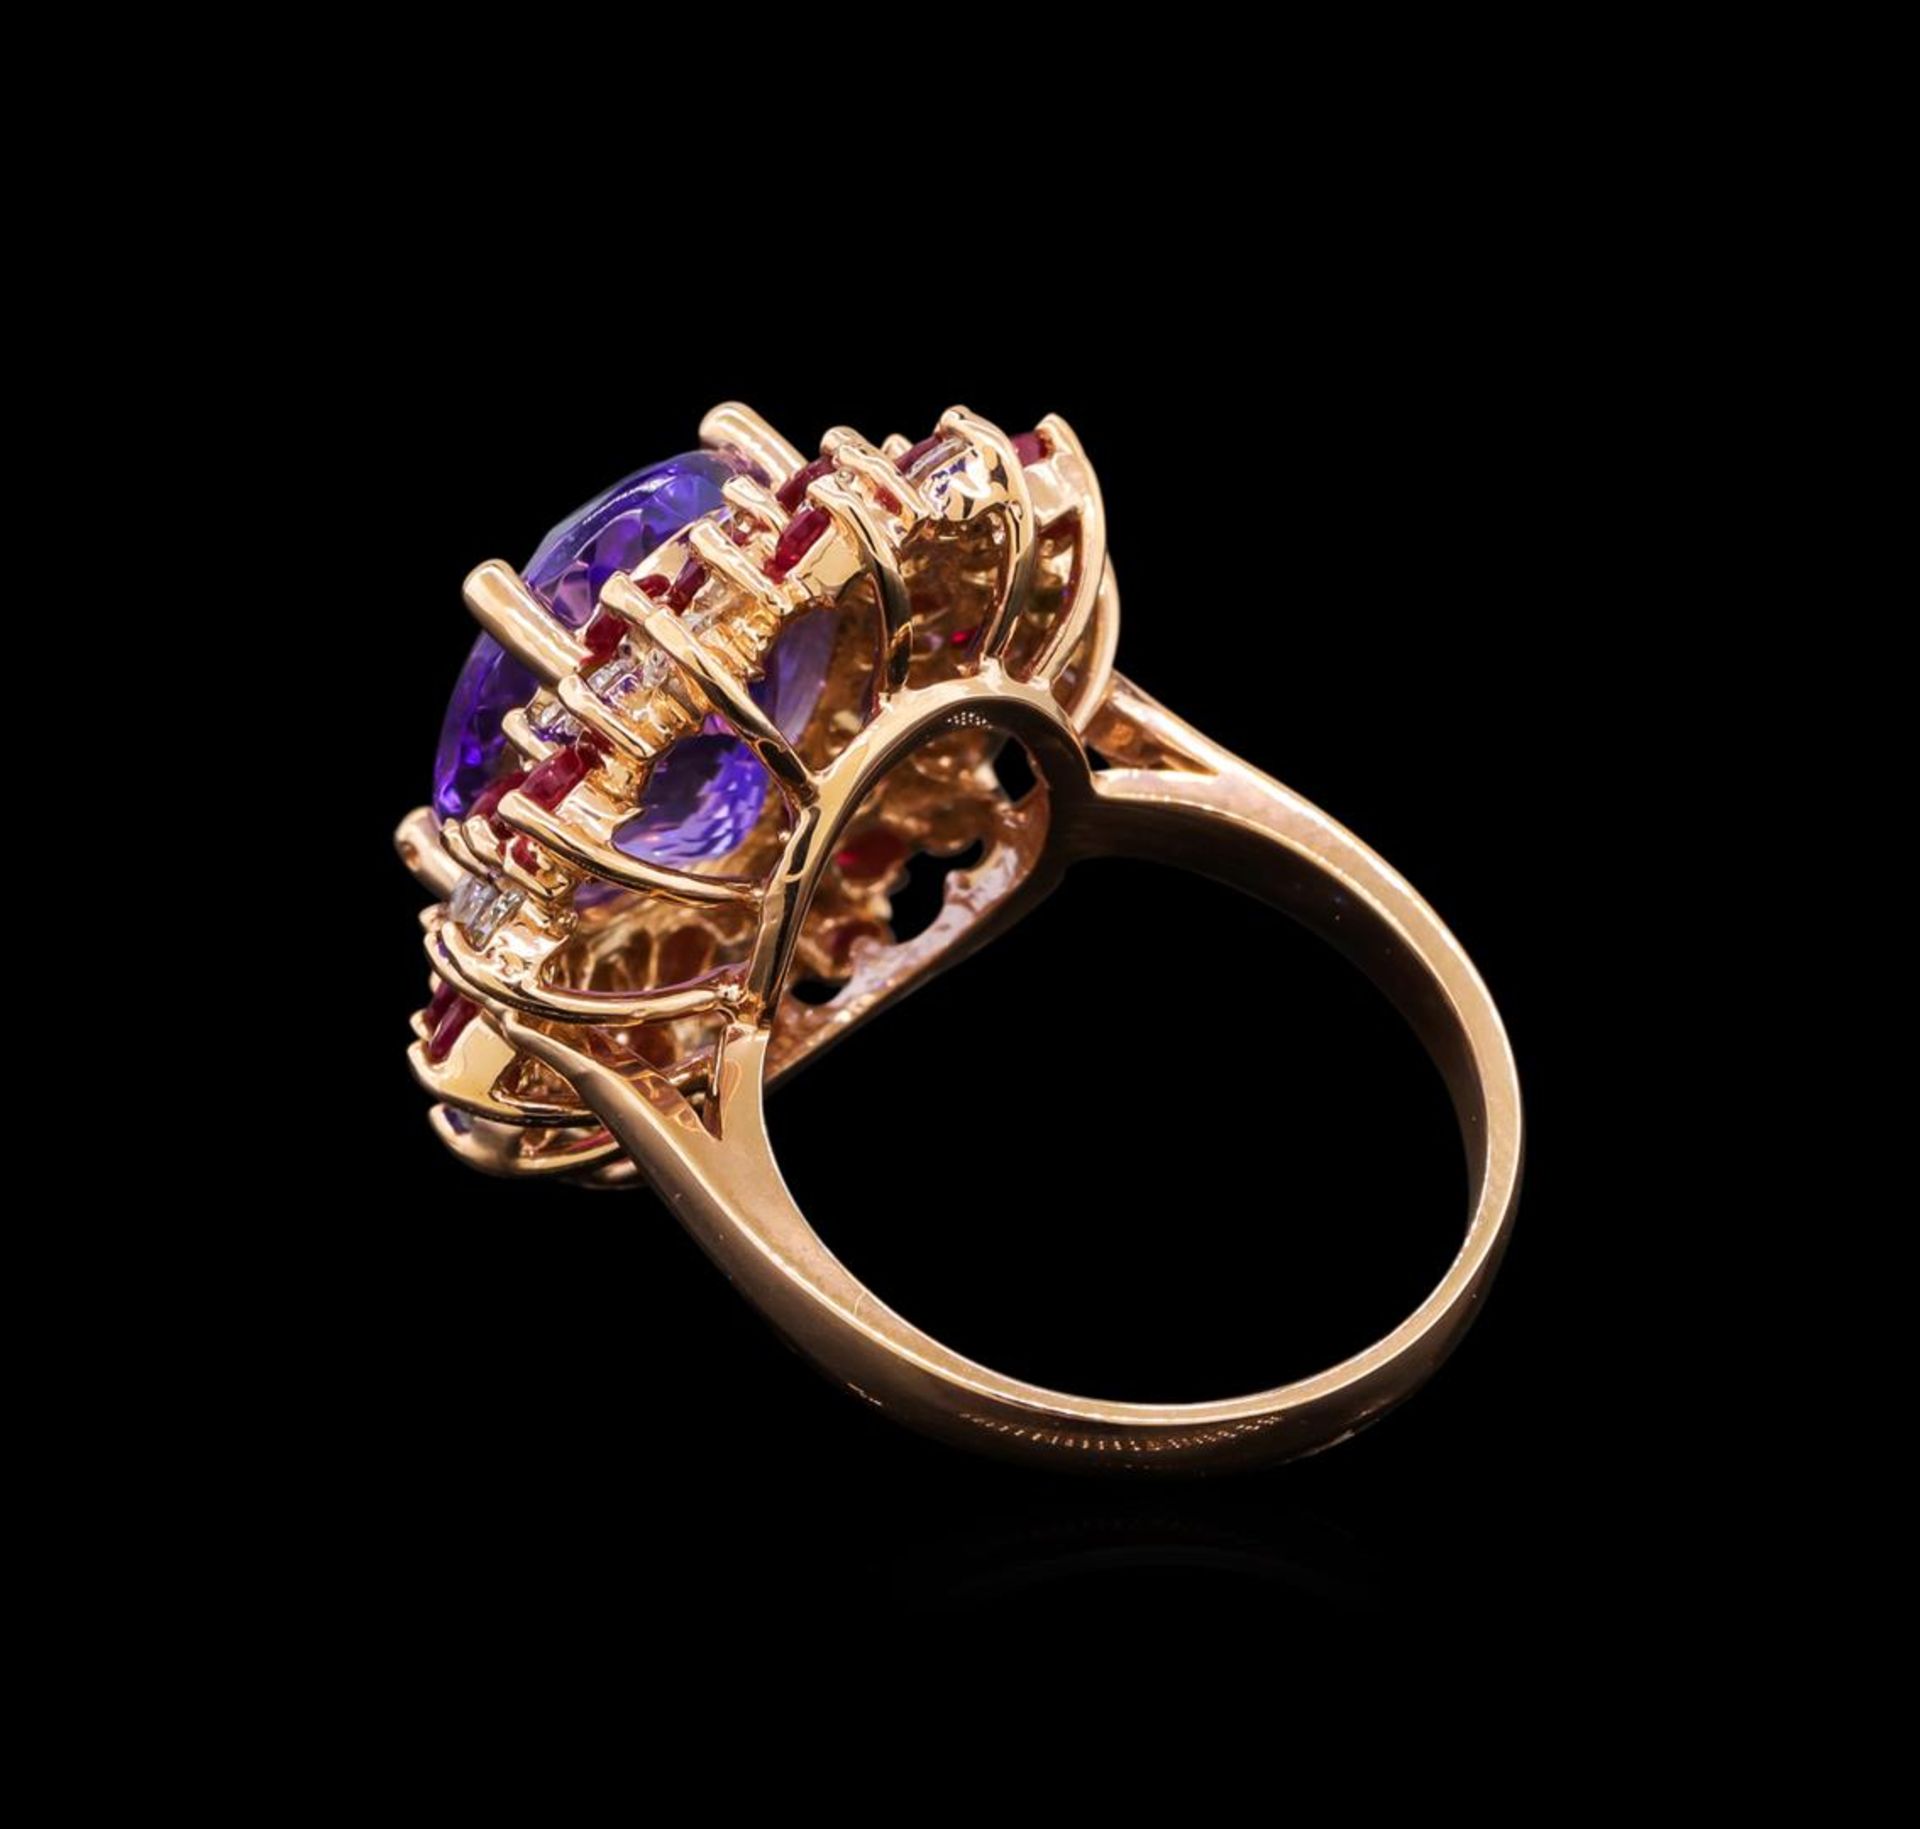 14KT Rose Gold 7.95 ctw Tanzanite, Ruby and Diamond Ring - Image 3 of 5